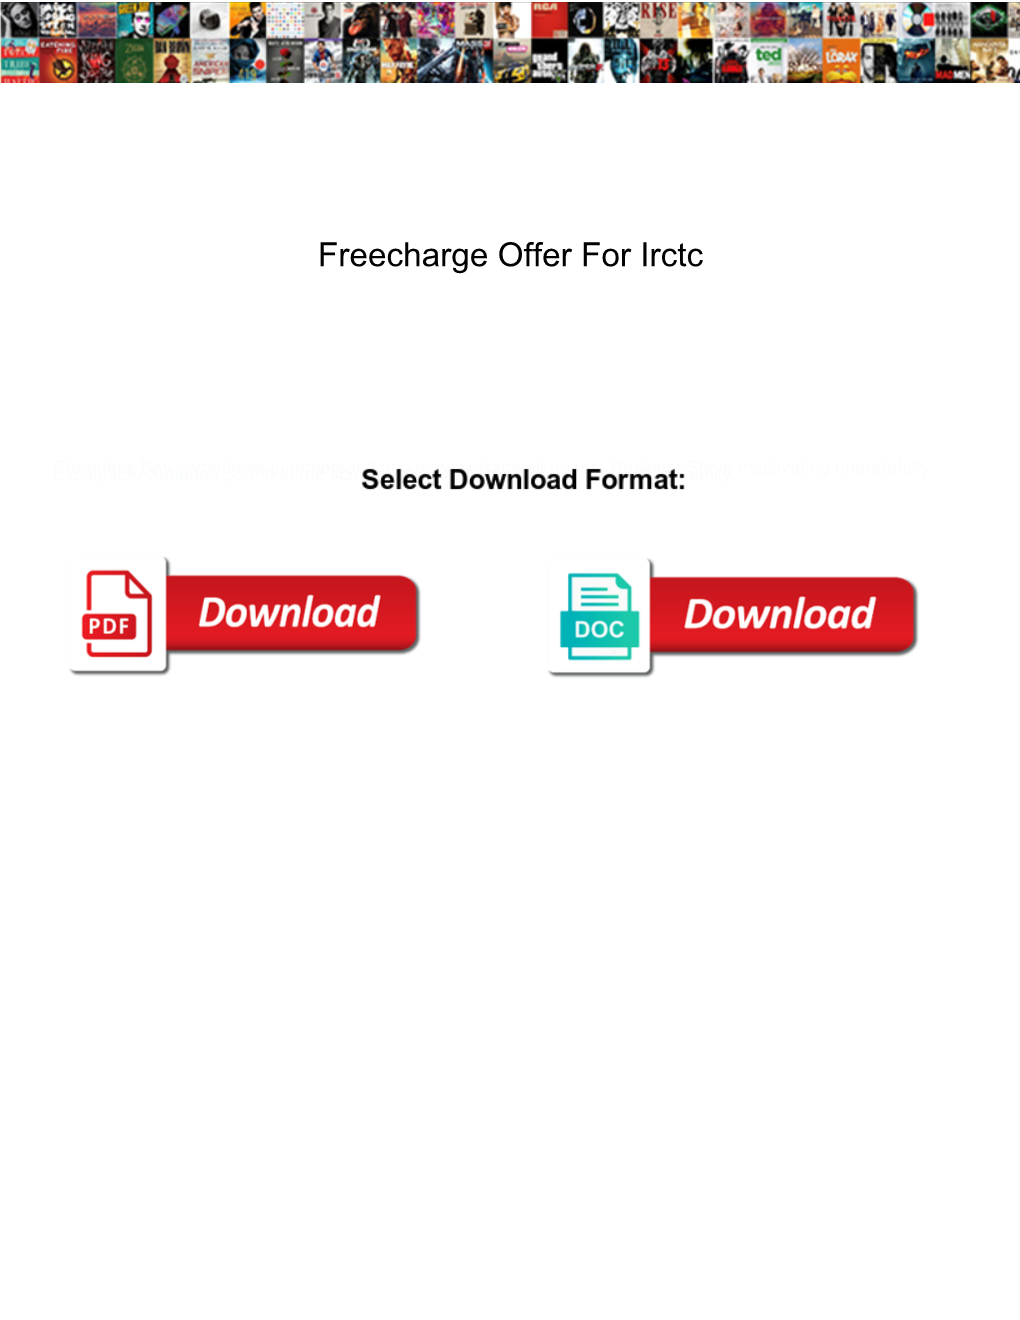 Freecharge Offer for Irctc